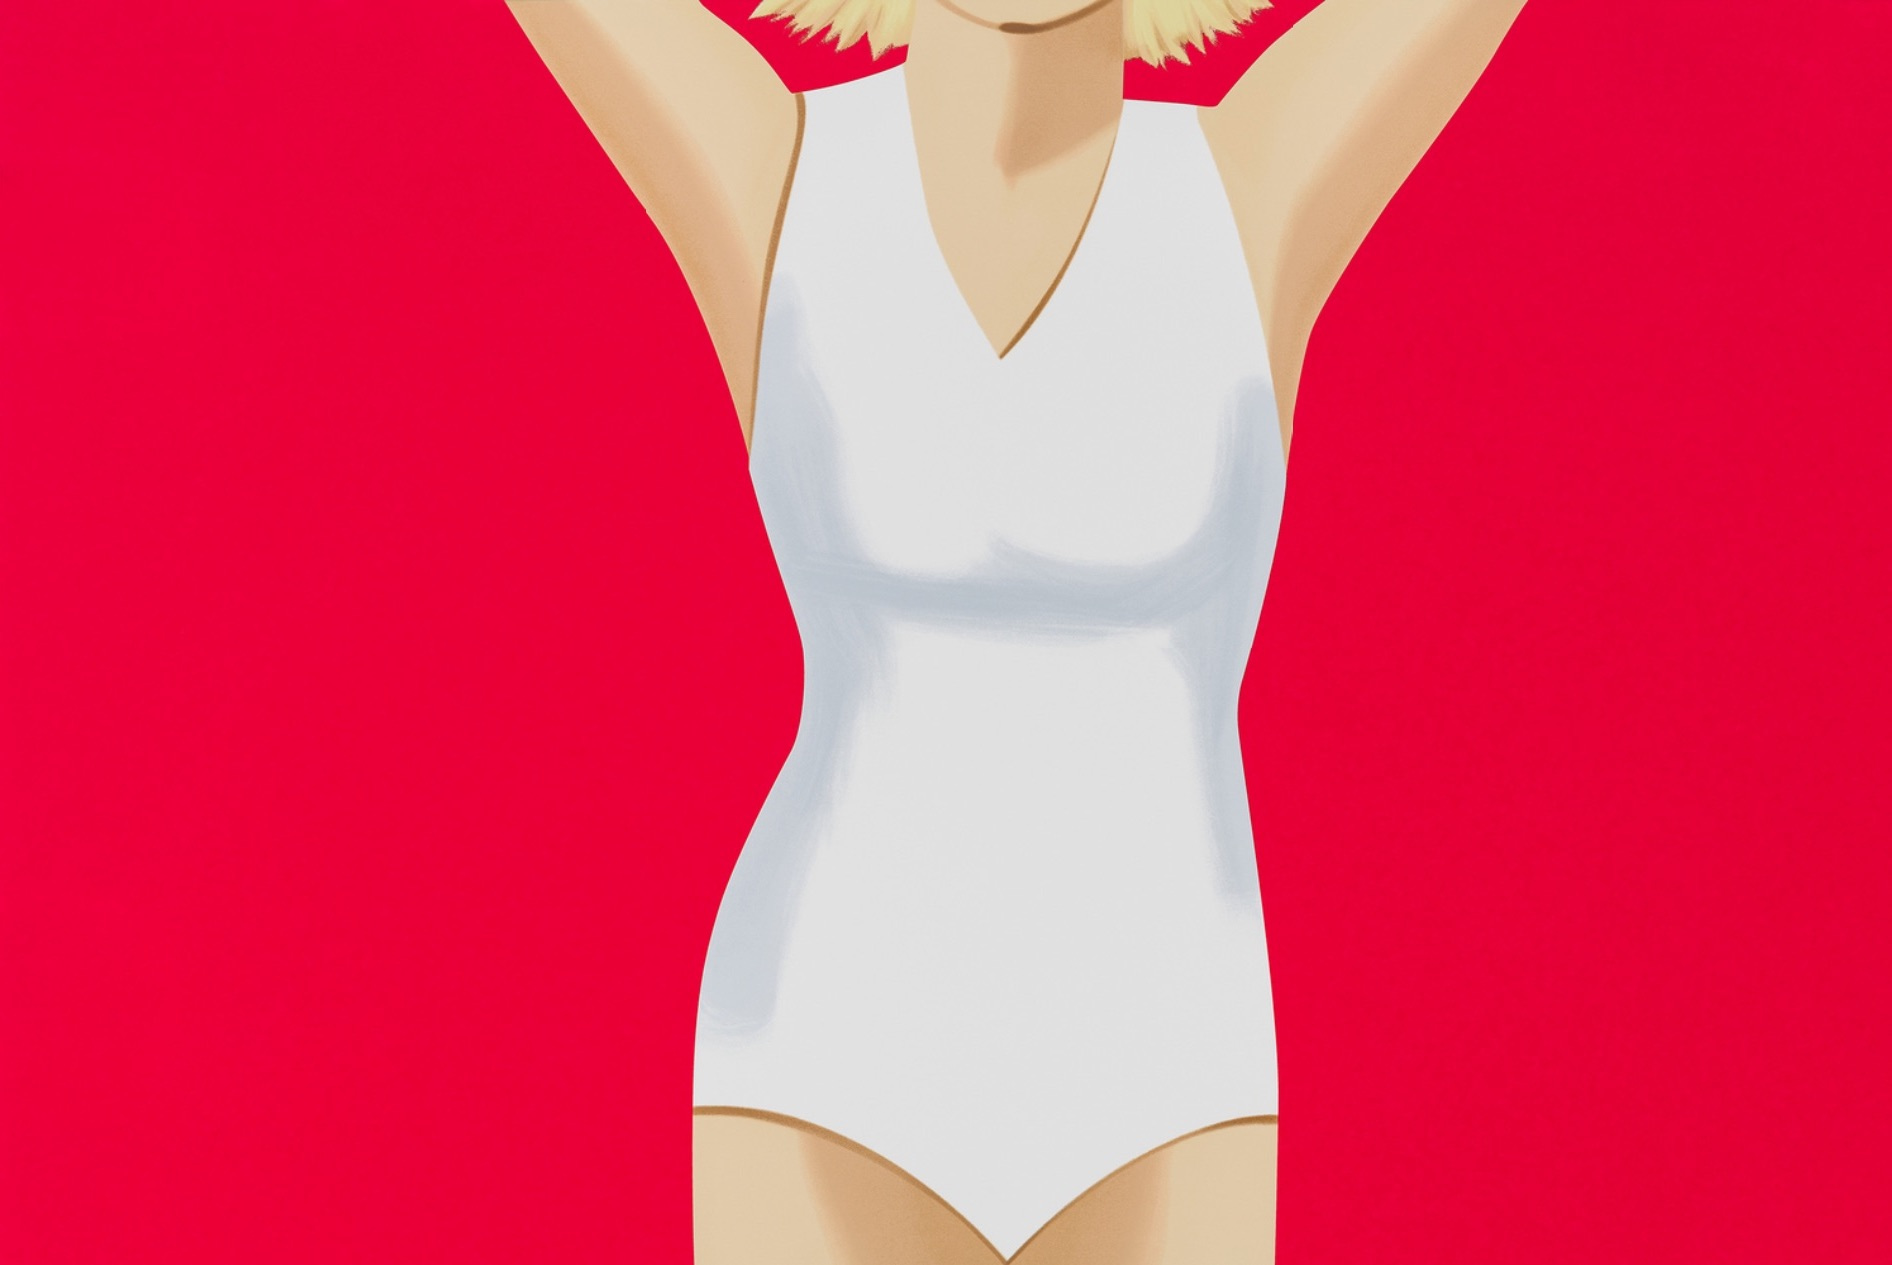 Alex Katz_Coca-Cola Girl 2_Edition 17 of 60_2019_Screenprint on Saunders Waterford 425gsm paper_40x60inches unframed_signed and numbered in pencil